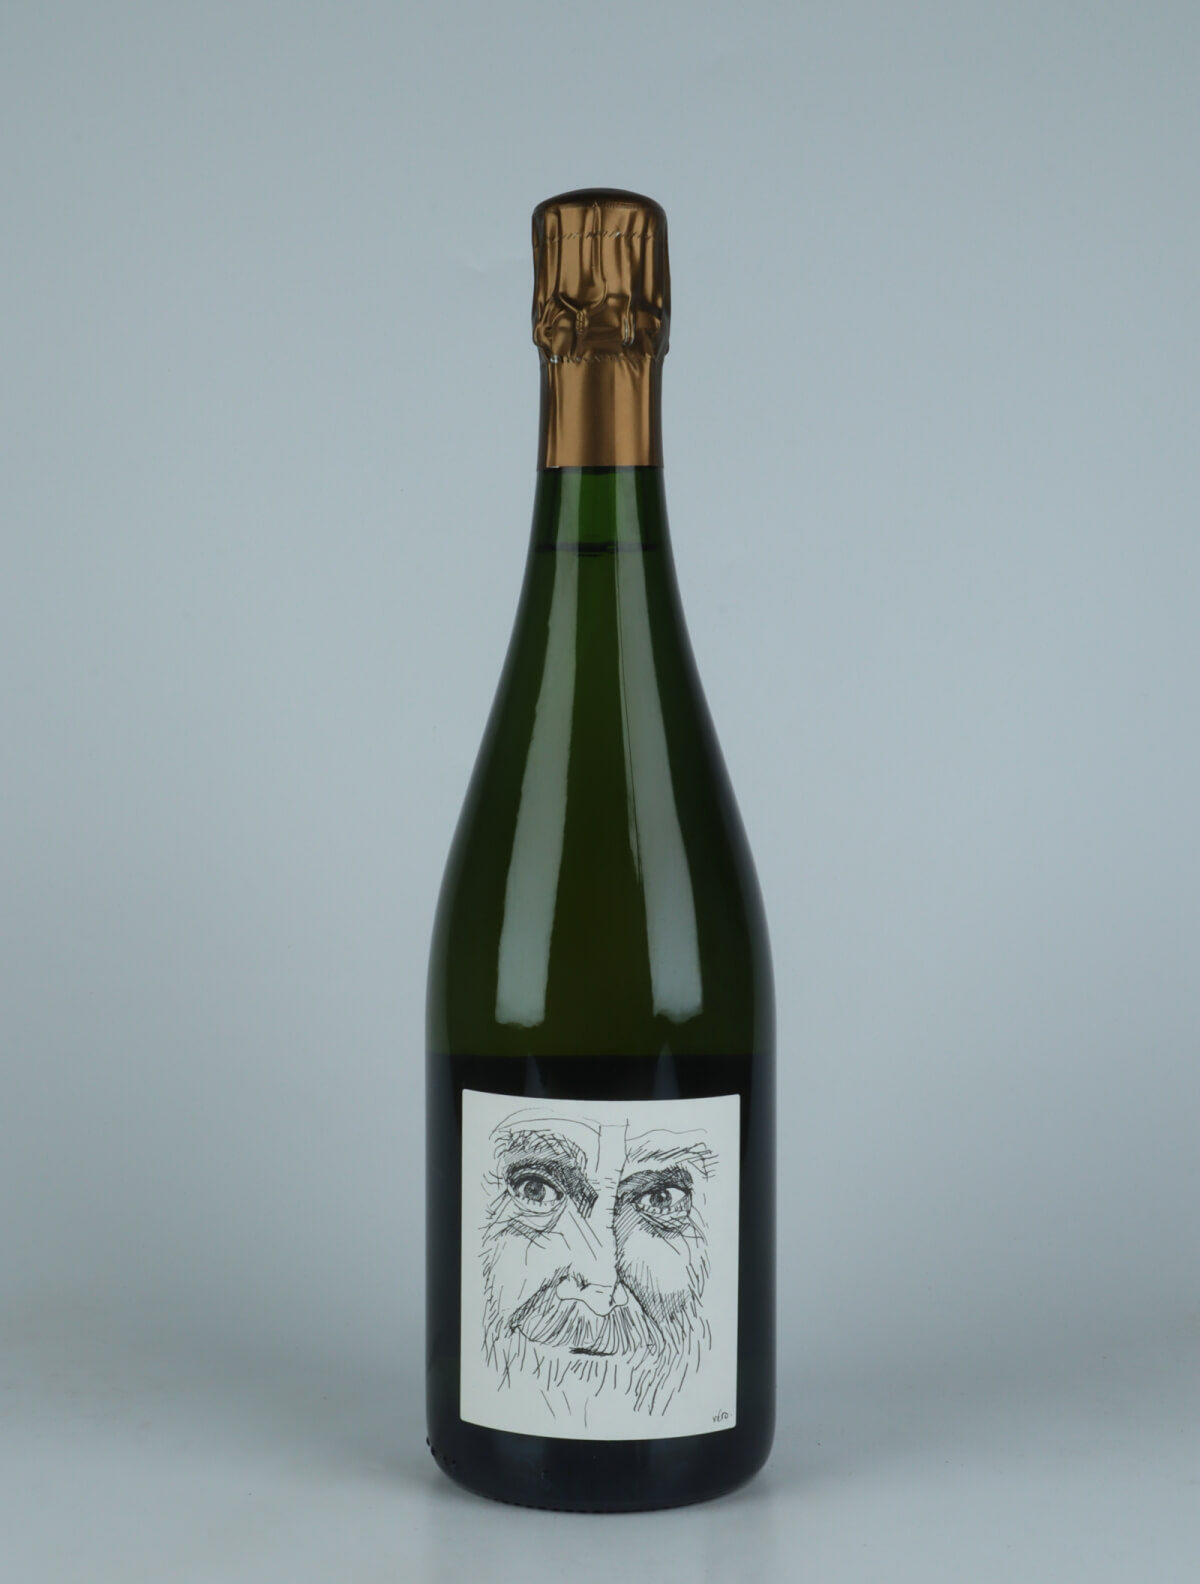 A bottle 2018 Heraclite - Pinot Meunier - Brut Nature Sparkling from Stroebel, Champagne in France